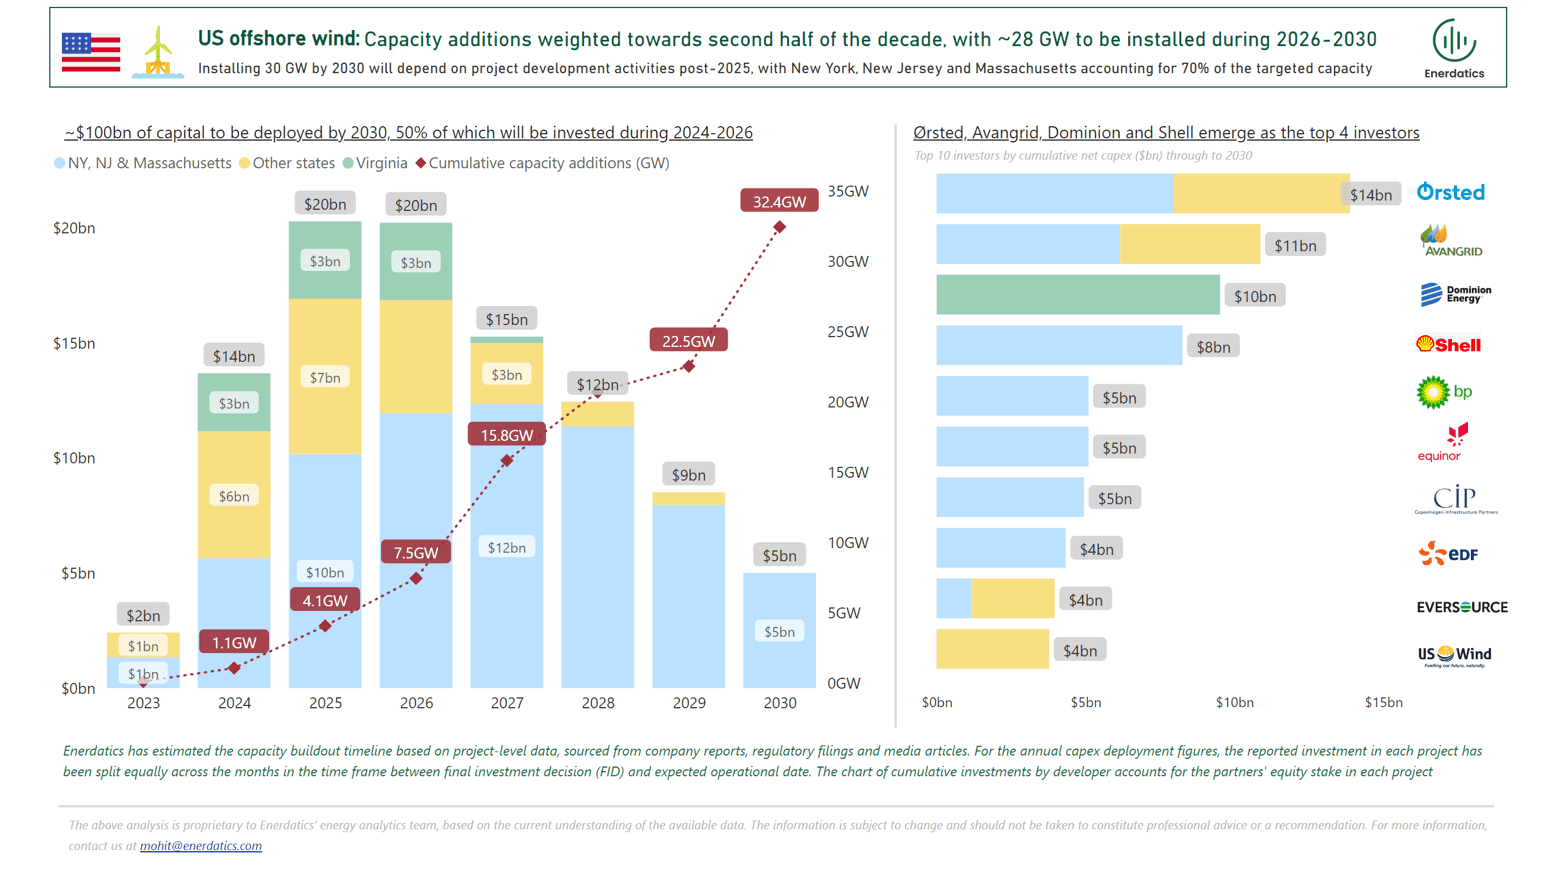 Us offshore wind enerdatics forecasts major capacity additions post 2025 with 28 gw to be installed during 2026 2030 (1) 734tl